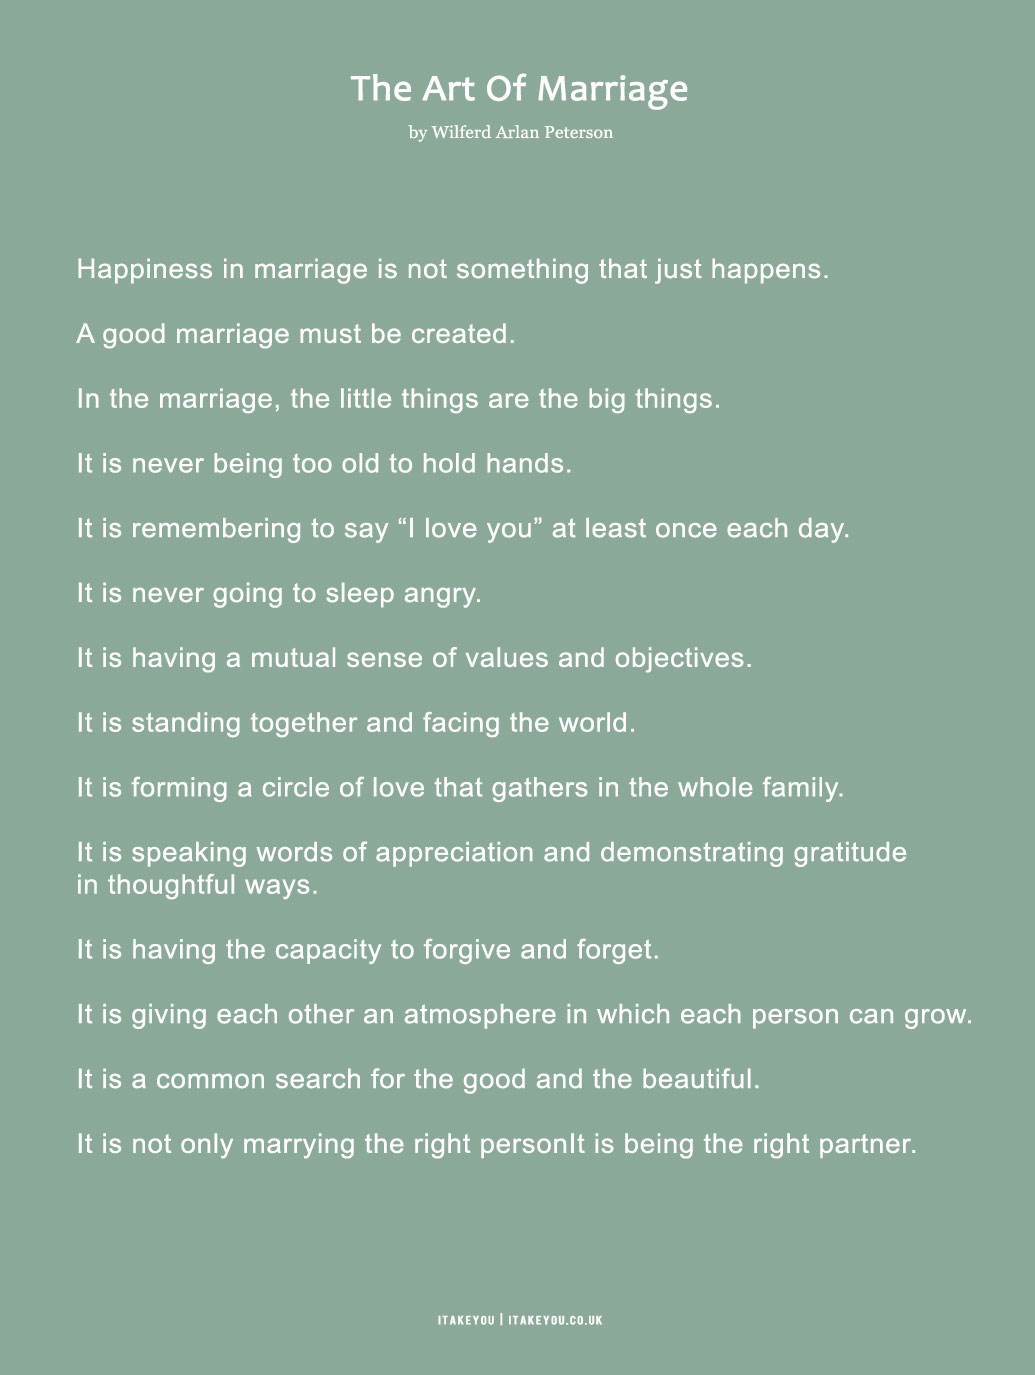 free printable wedding reading, the art of marriage poem full version, the art of marriage poem words, the art of marriage poem framed, the art of marriage quote, the art of marriage print, 8. the art of marriage by wilferd a. peterson, the art of marriage sign, what makes a good marriage poem